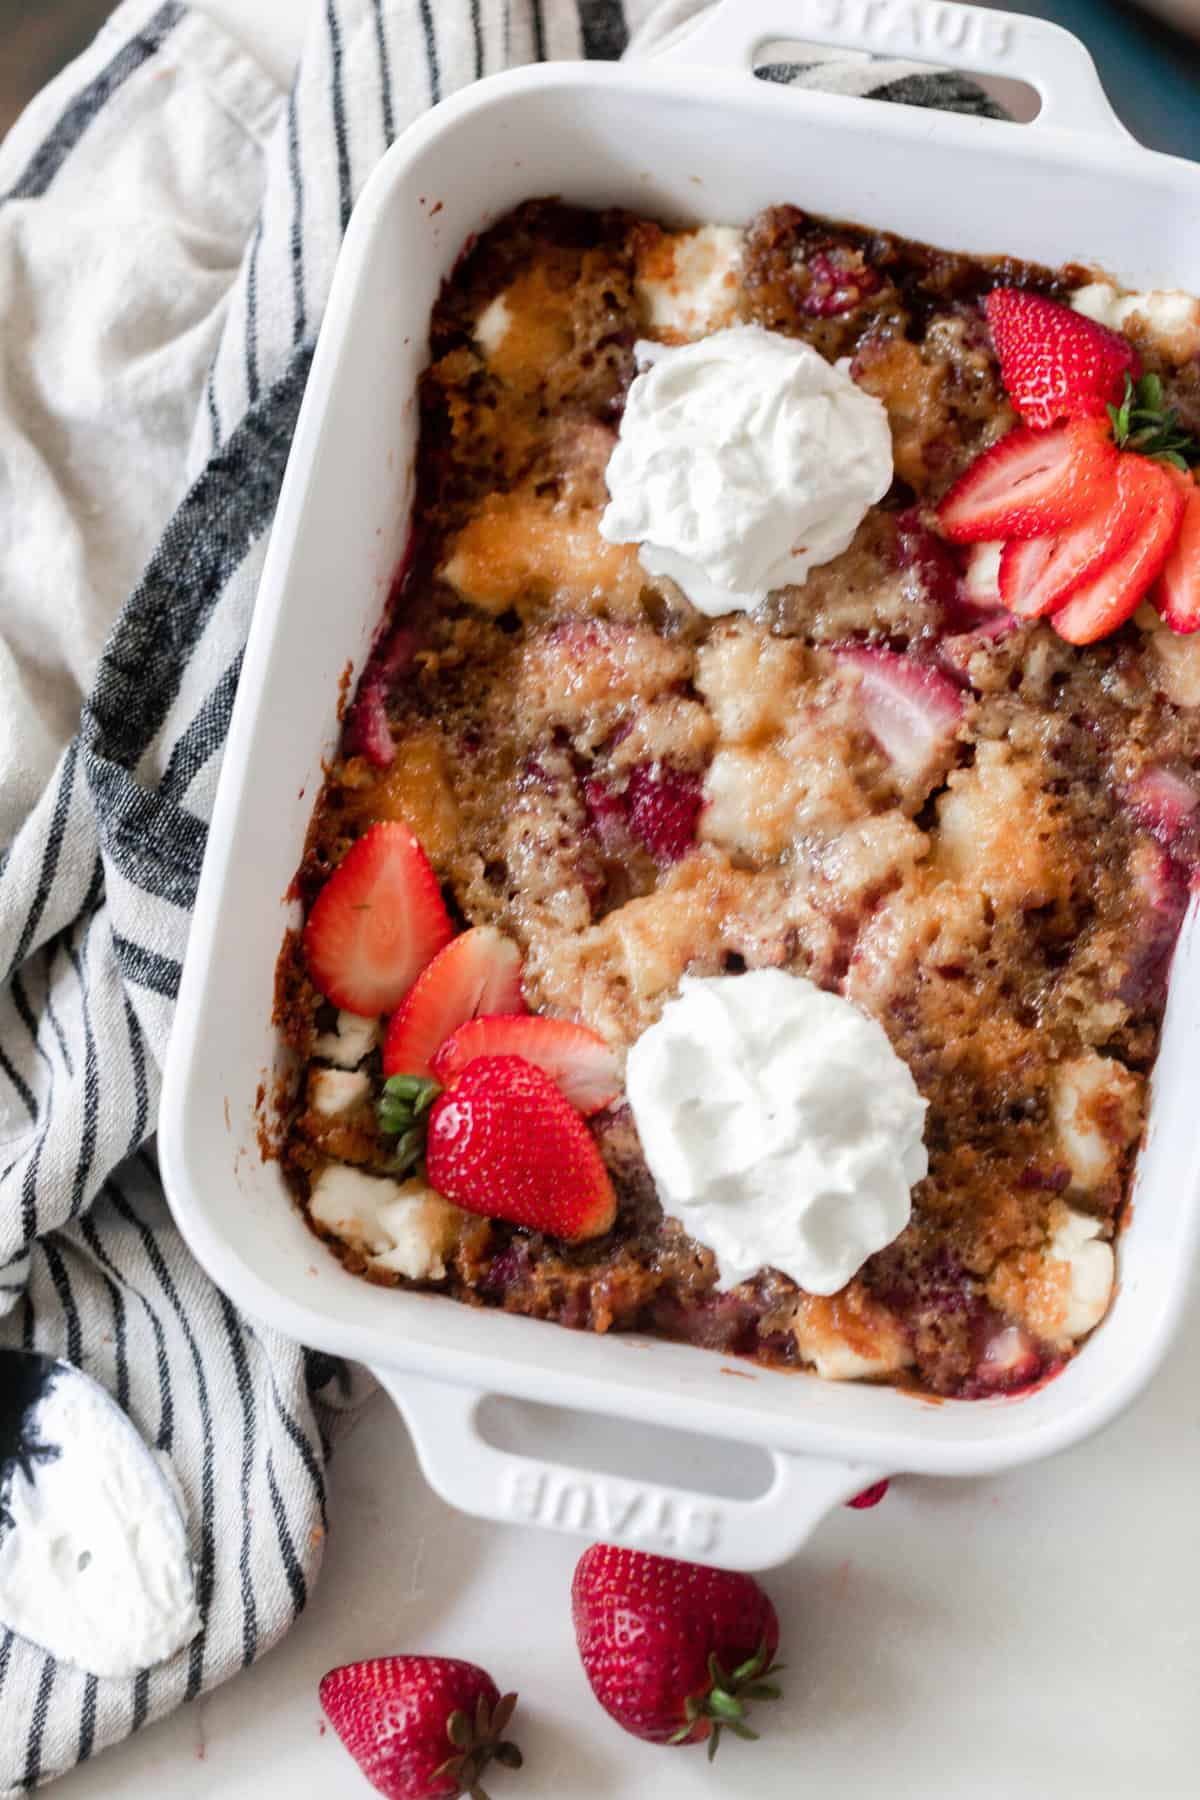 sourdough strawberry cobbler topped with fresh whipped cream and sliced strawberries. The cobbler is in a white baking dish on a white and black stripped towel